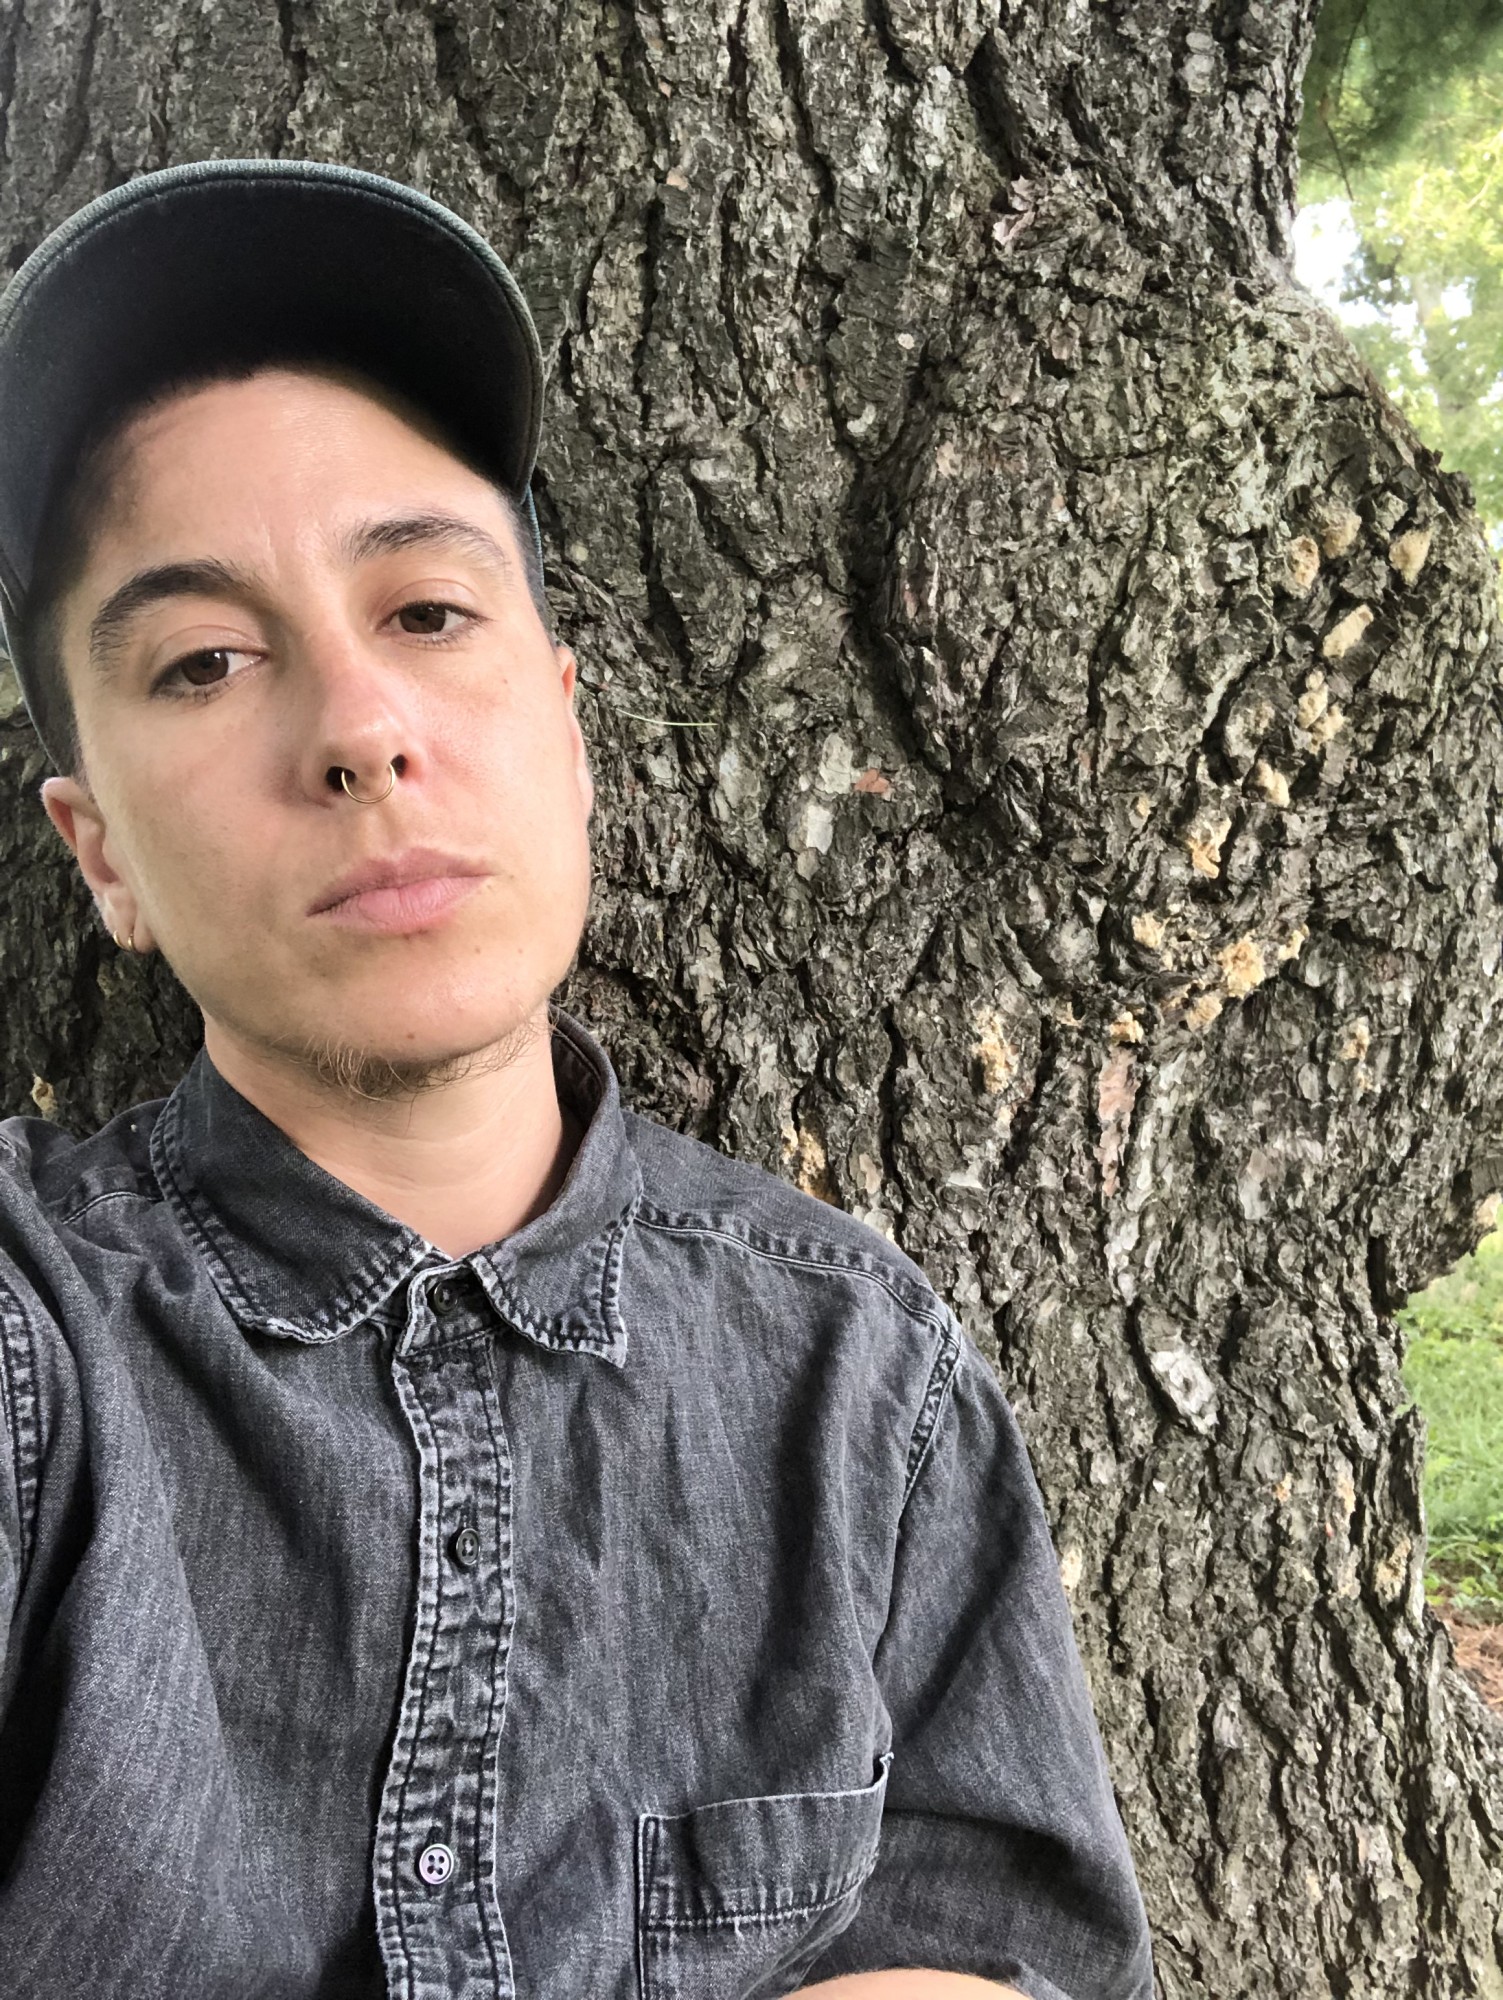 devynn emory is shown in a selfie-mode portrait, in the left of the frame, cropped from the torso up, wearing a grey denim button down and leaning against a tree.